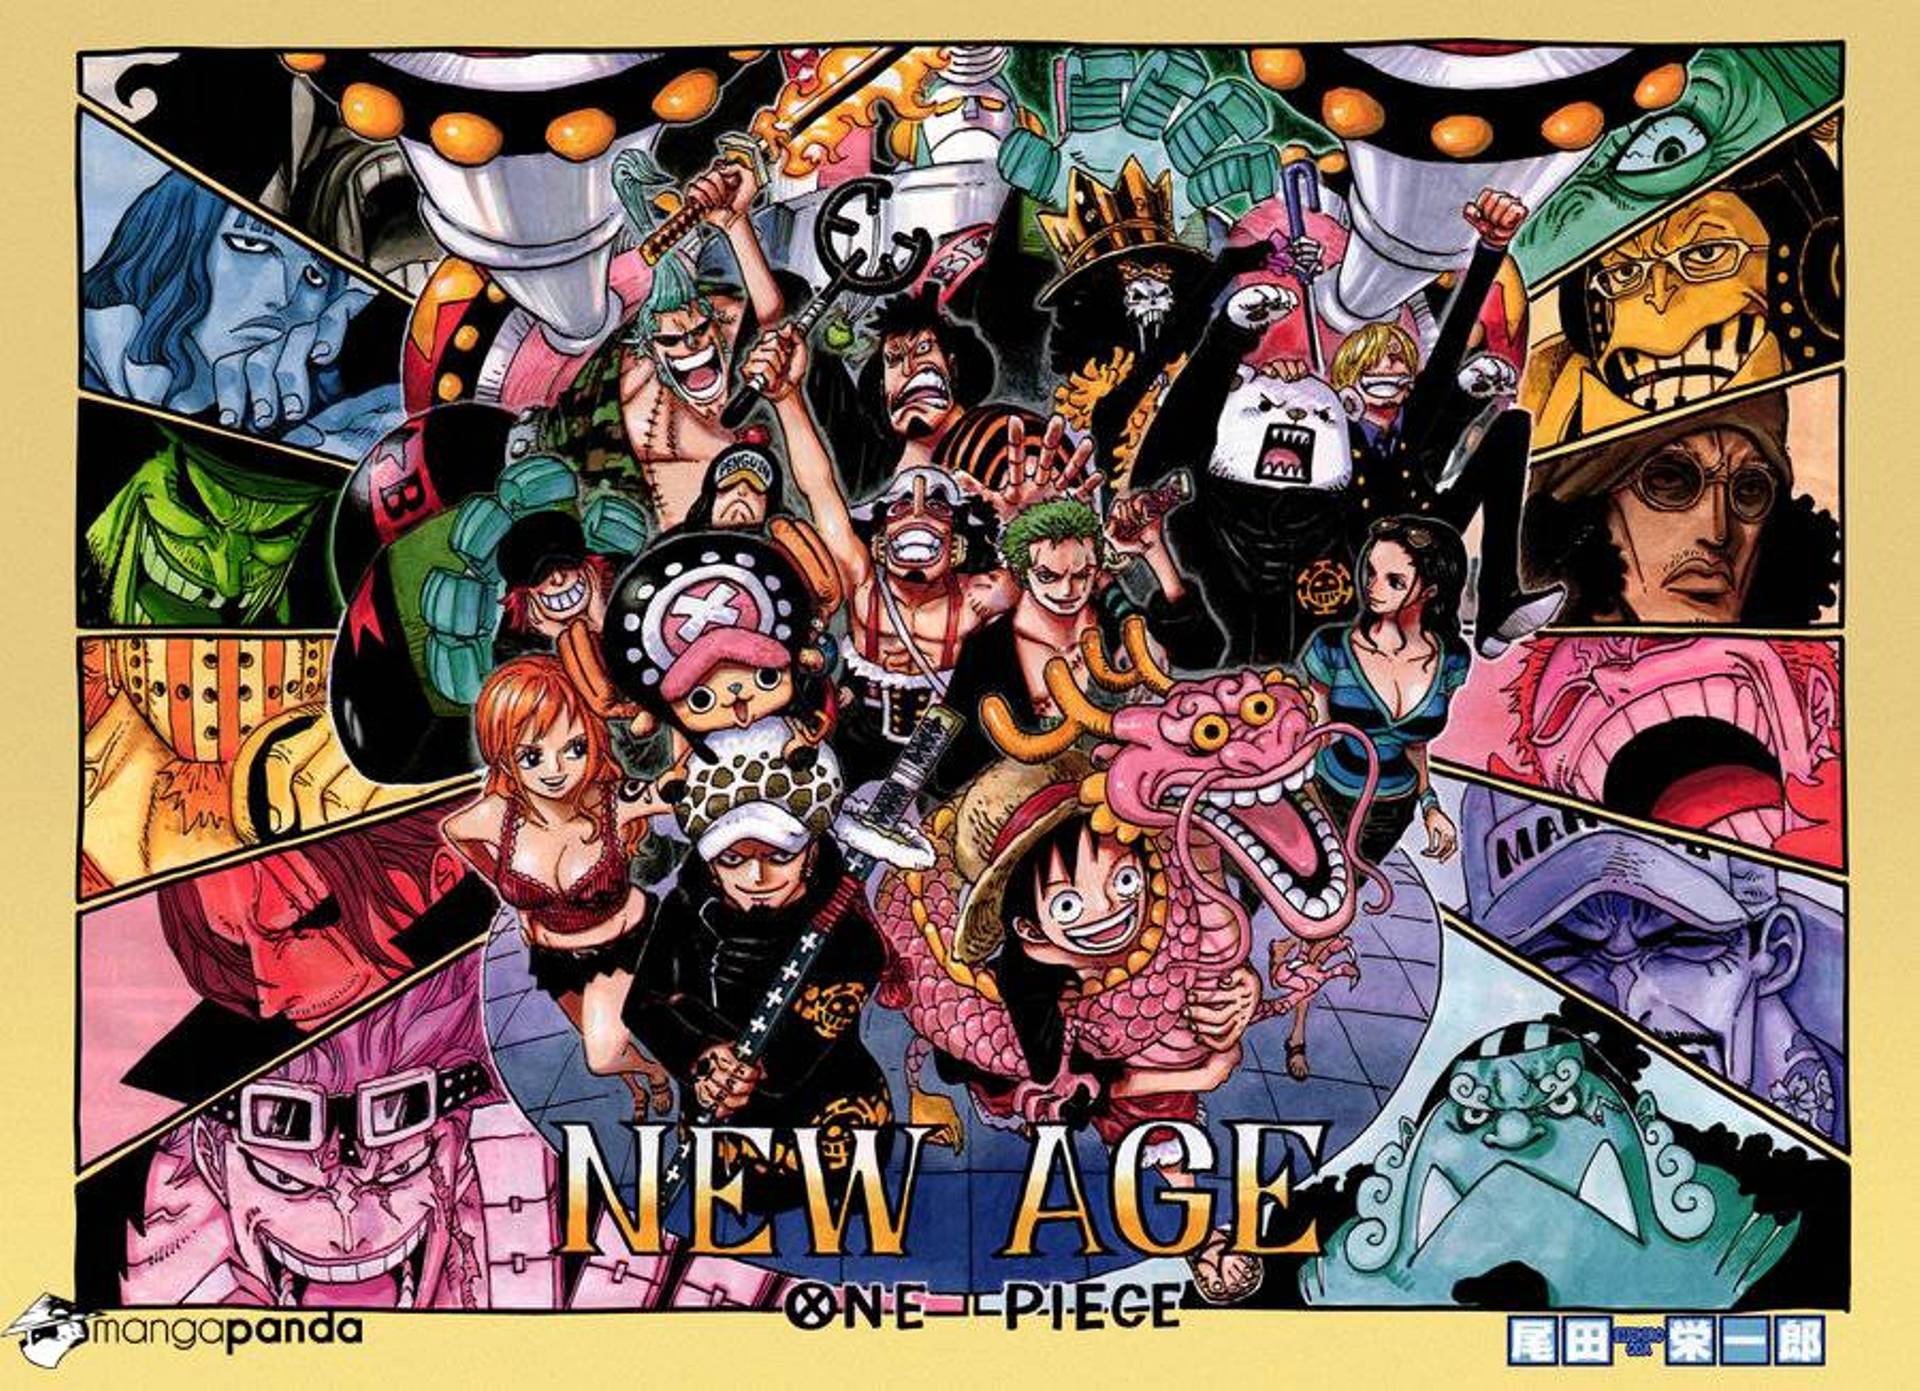 Download 80 Wallpaper One Piece All Characters terbaru 2019